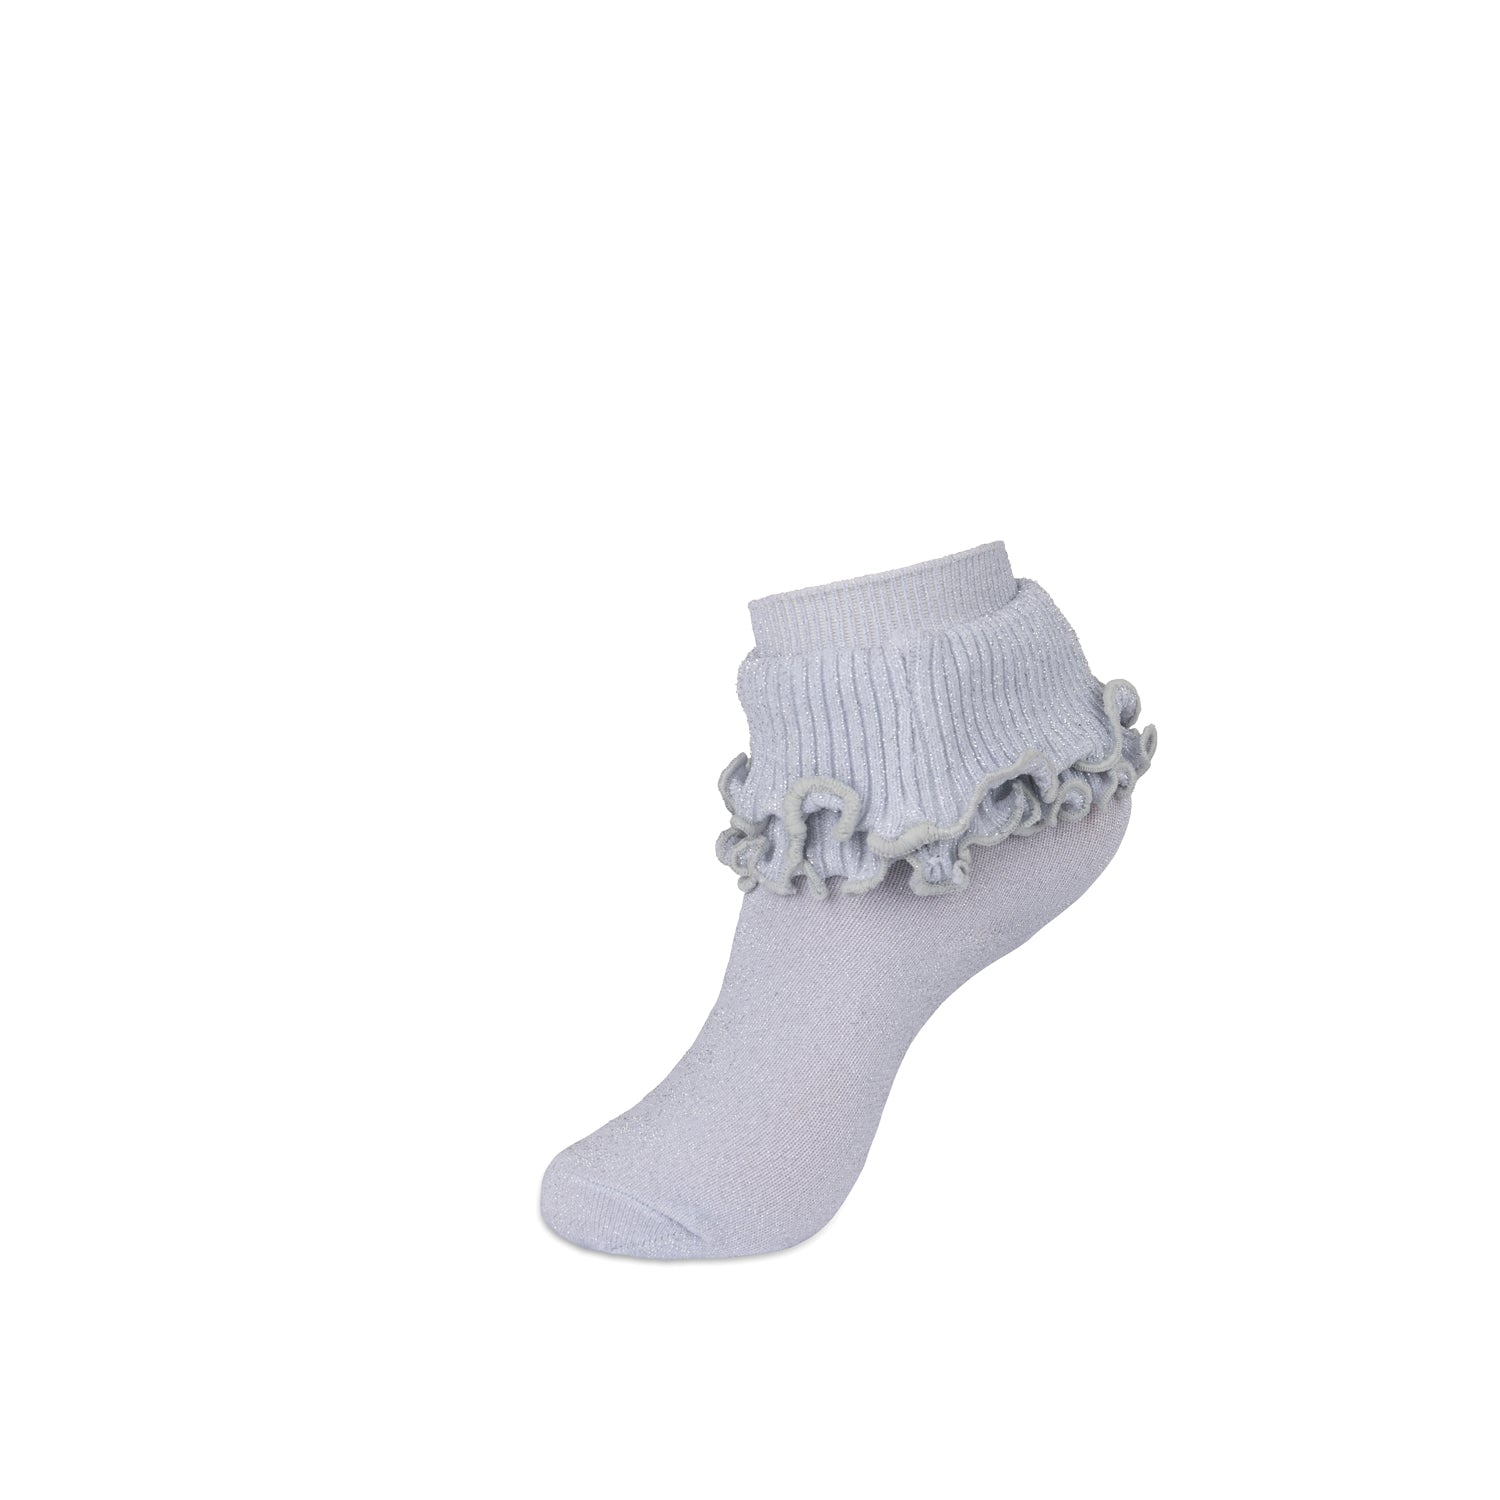 JRP Knit Lace Anklet White Silver